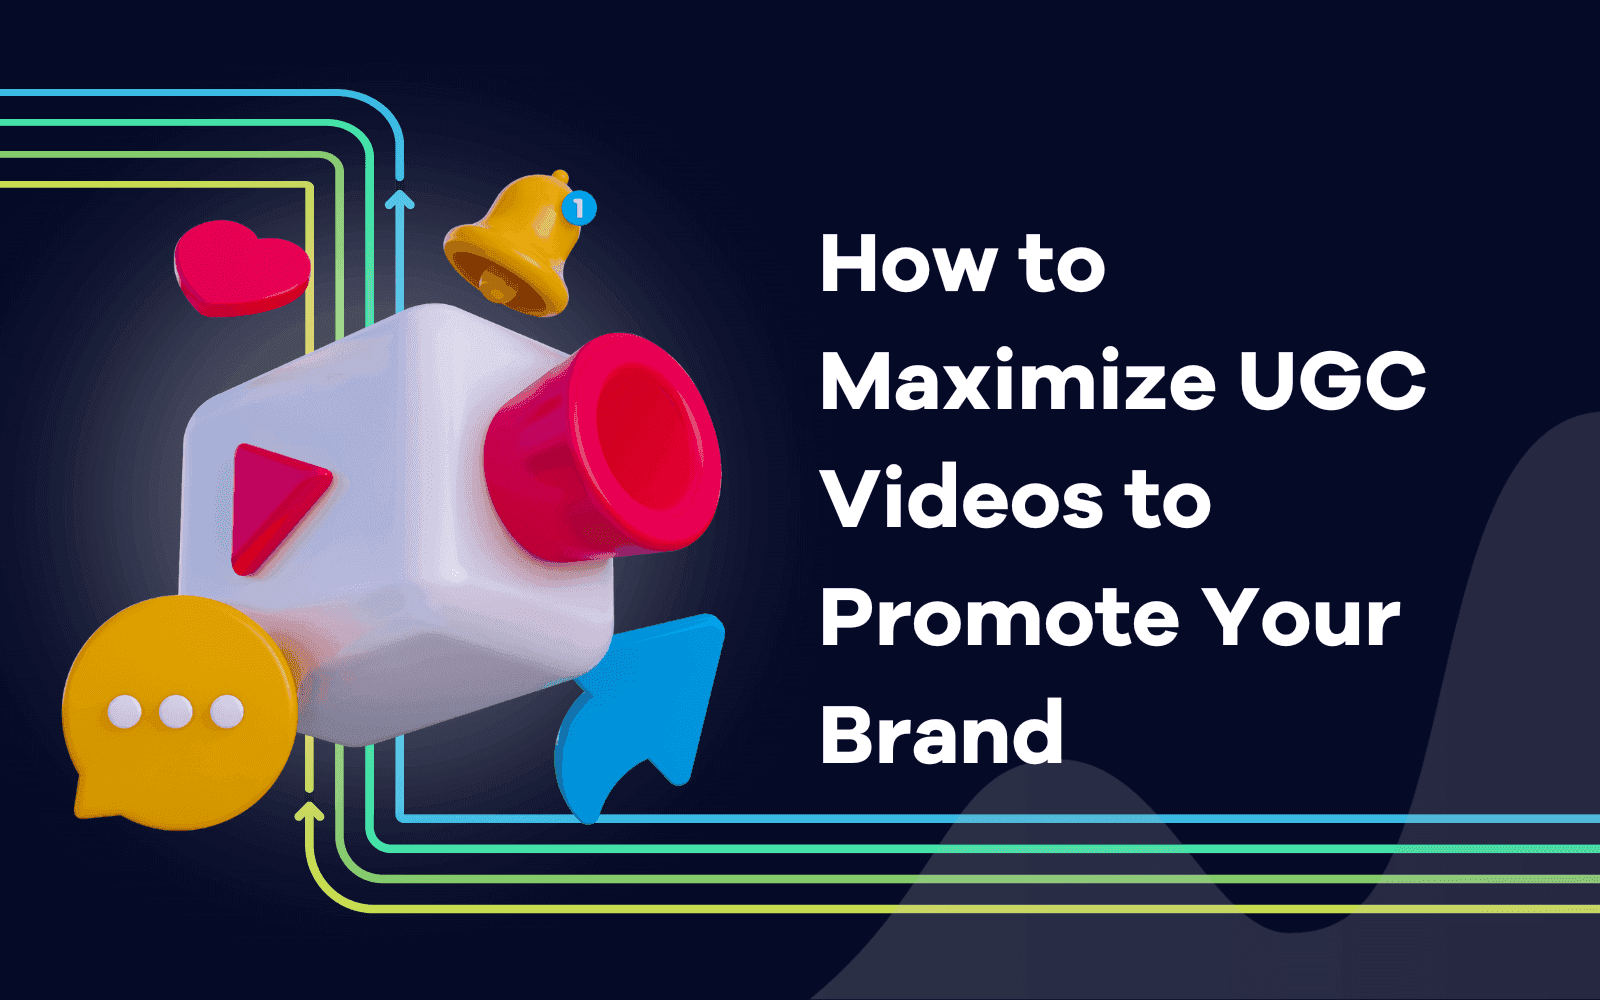 The Power of Authenticity: How to Maximize UGC Videos to Promote Your Brand